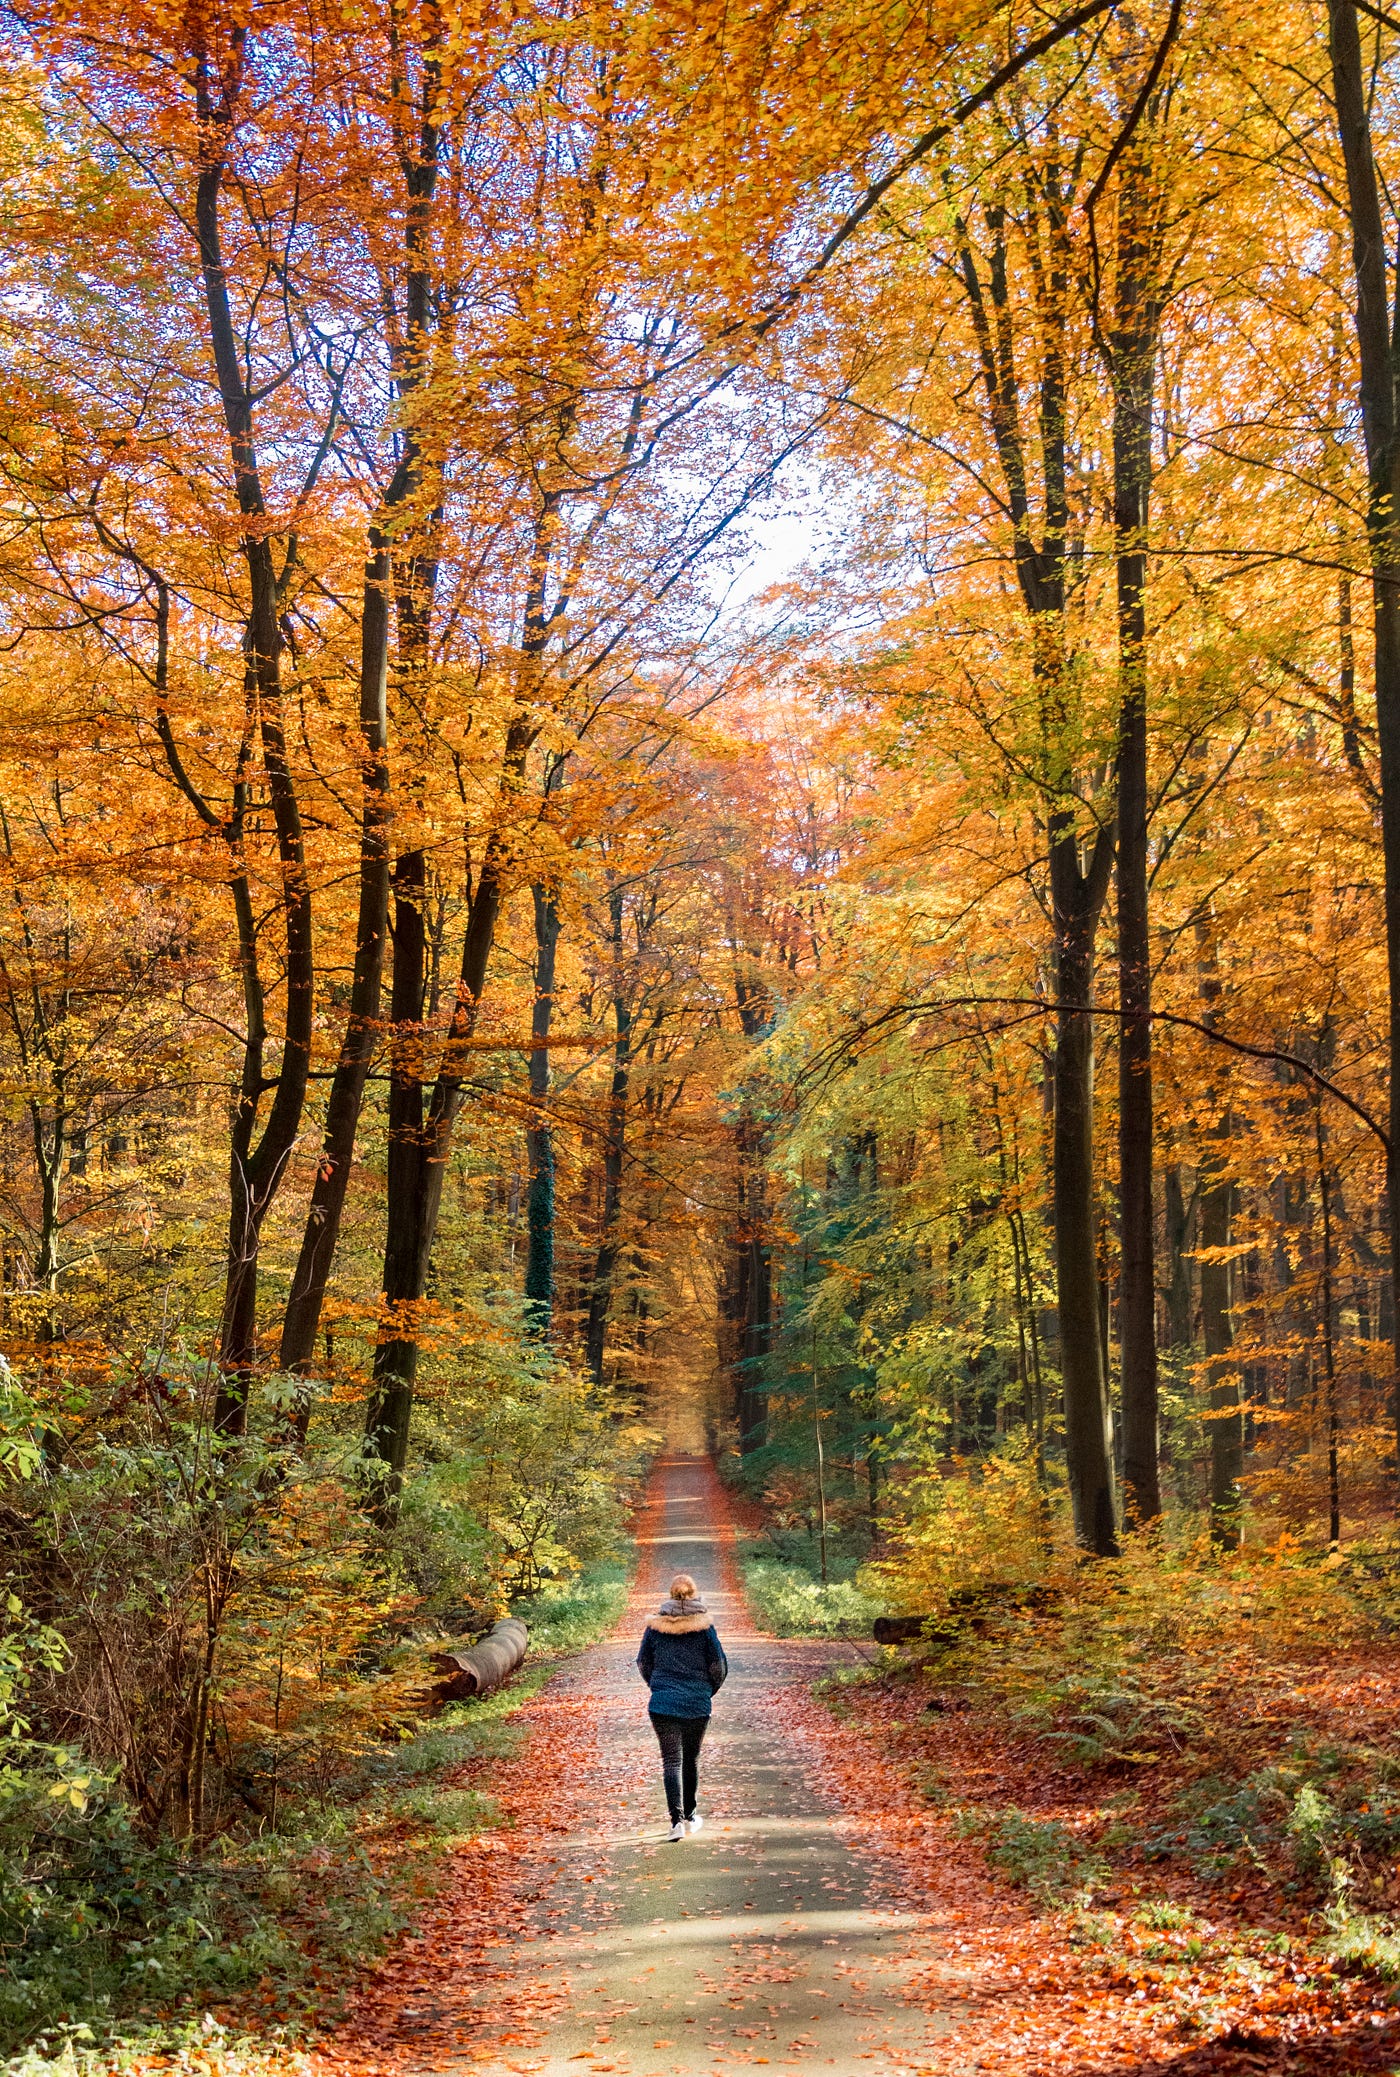 A woman walks away from us in the woods. The leaves are autumn-colored shades of yellow.